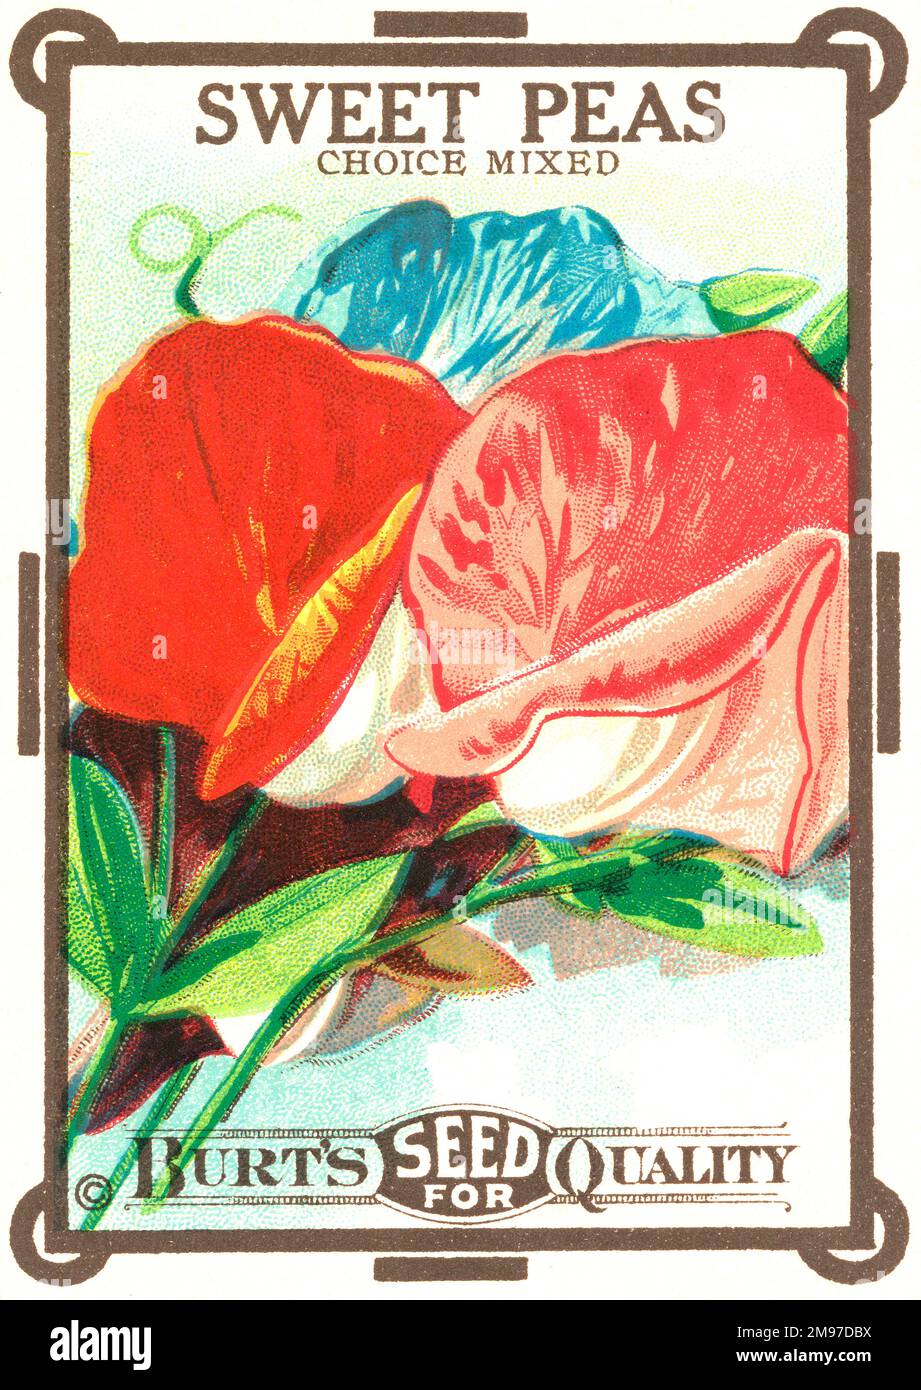 A beautiful Sweetpea seed packet from the Burt’s Seeds Company, New York. Stock Photo